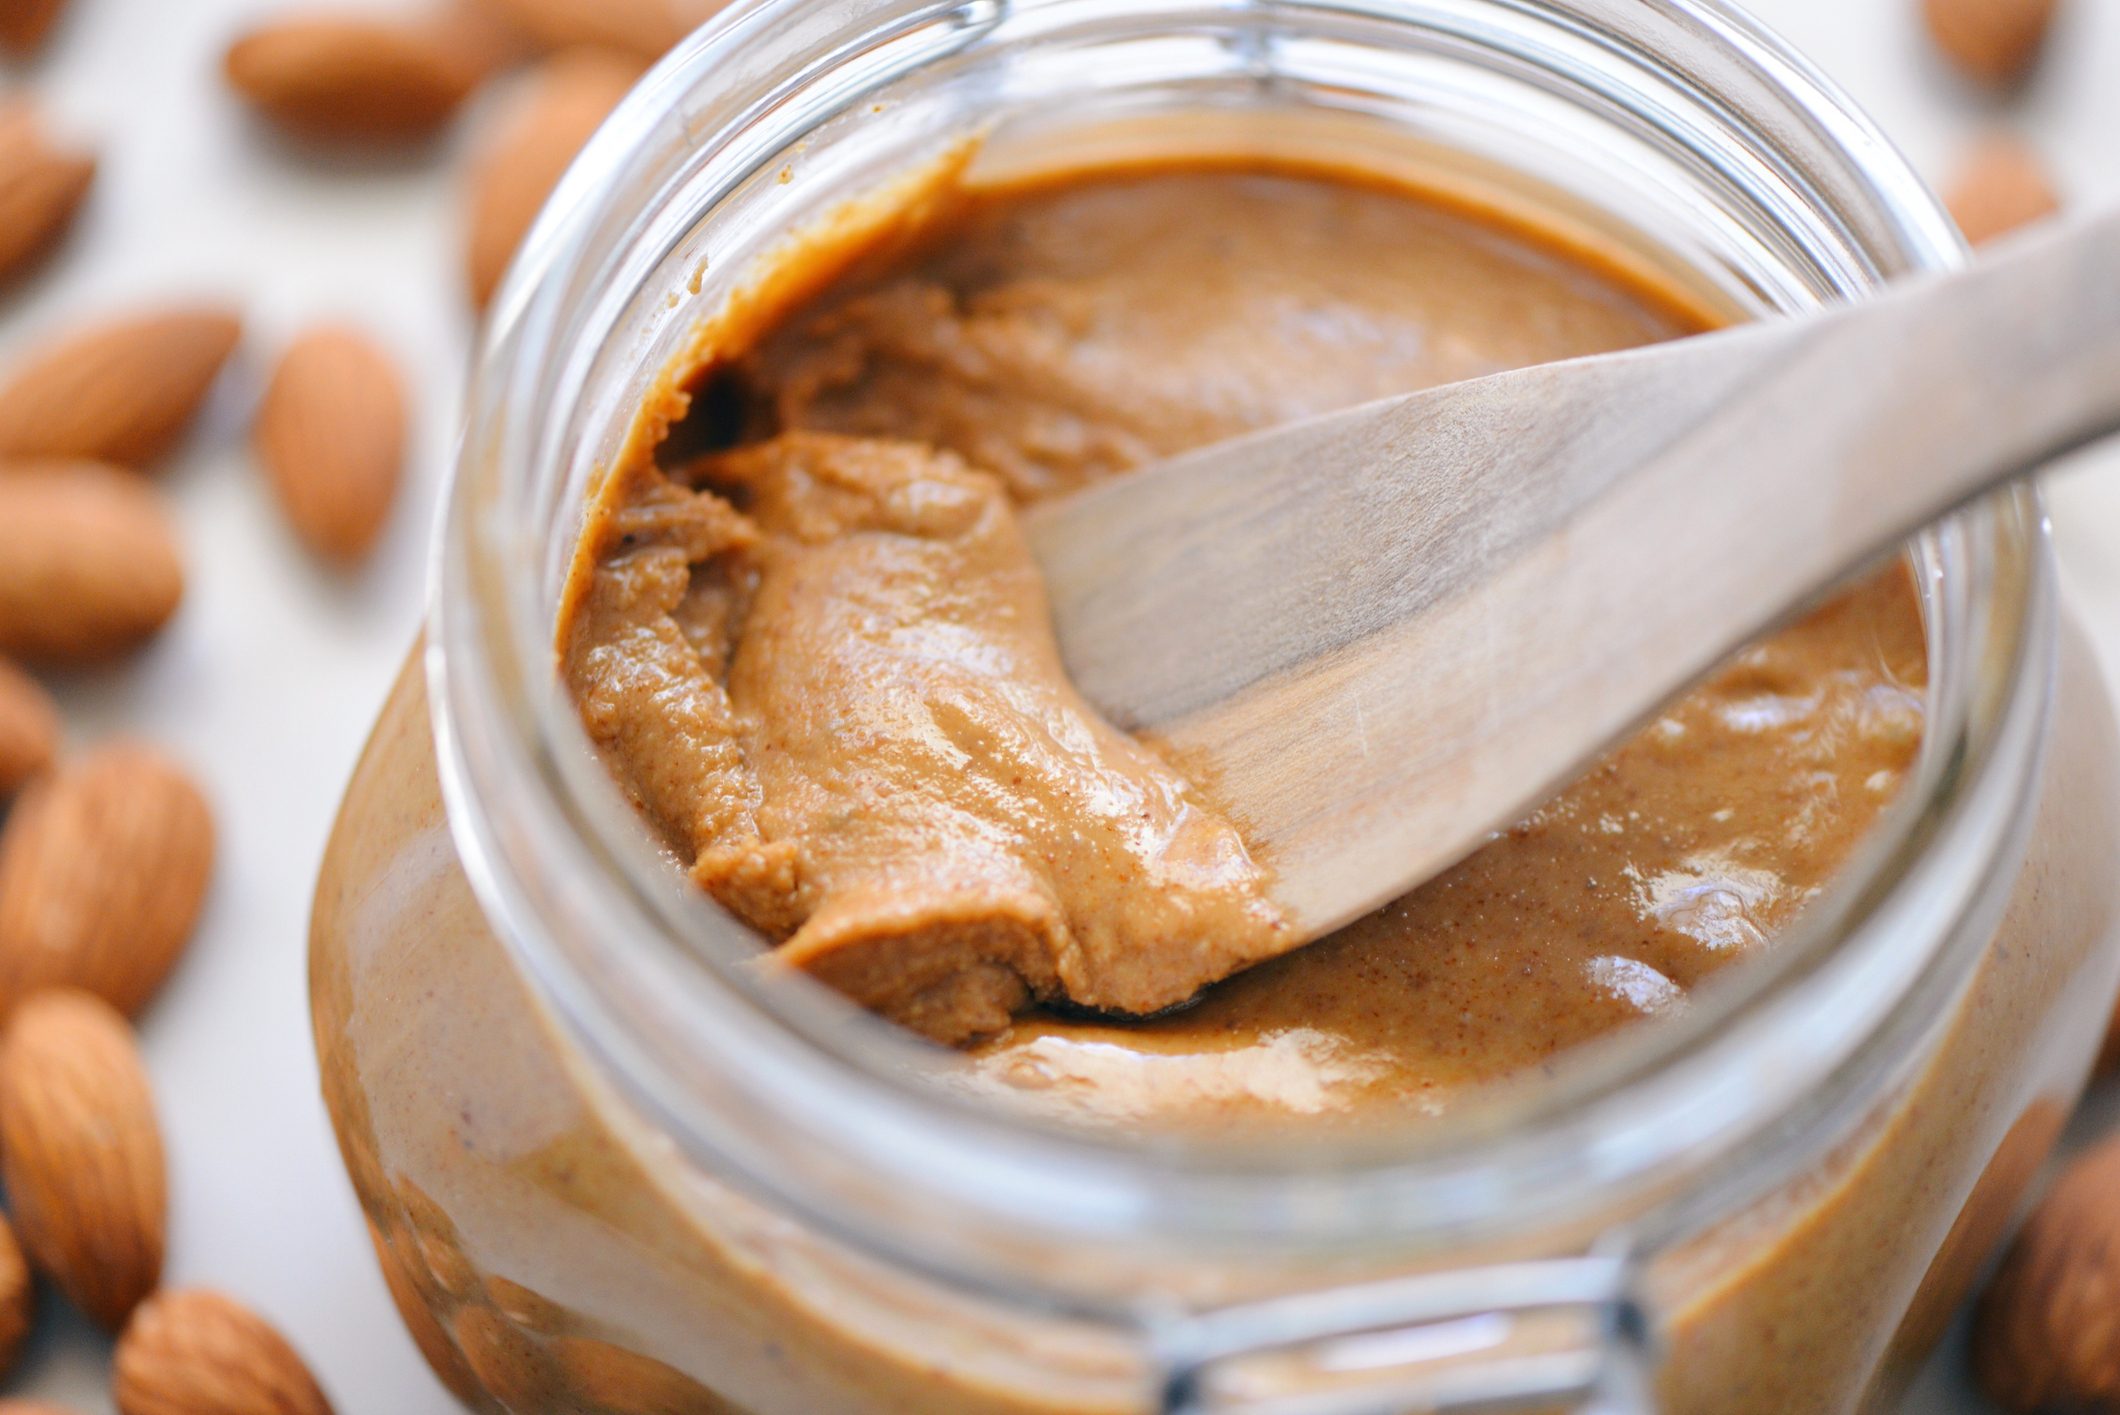 New Product Trends: Nut butters go beyond the jar